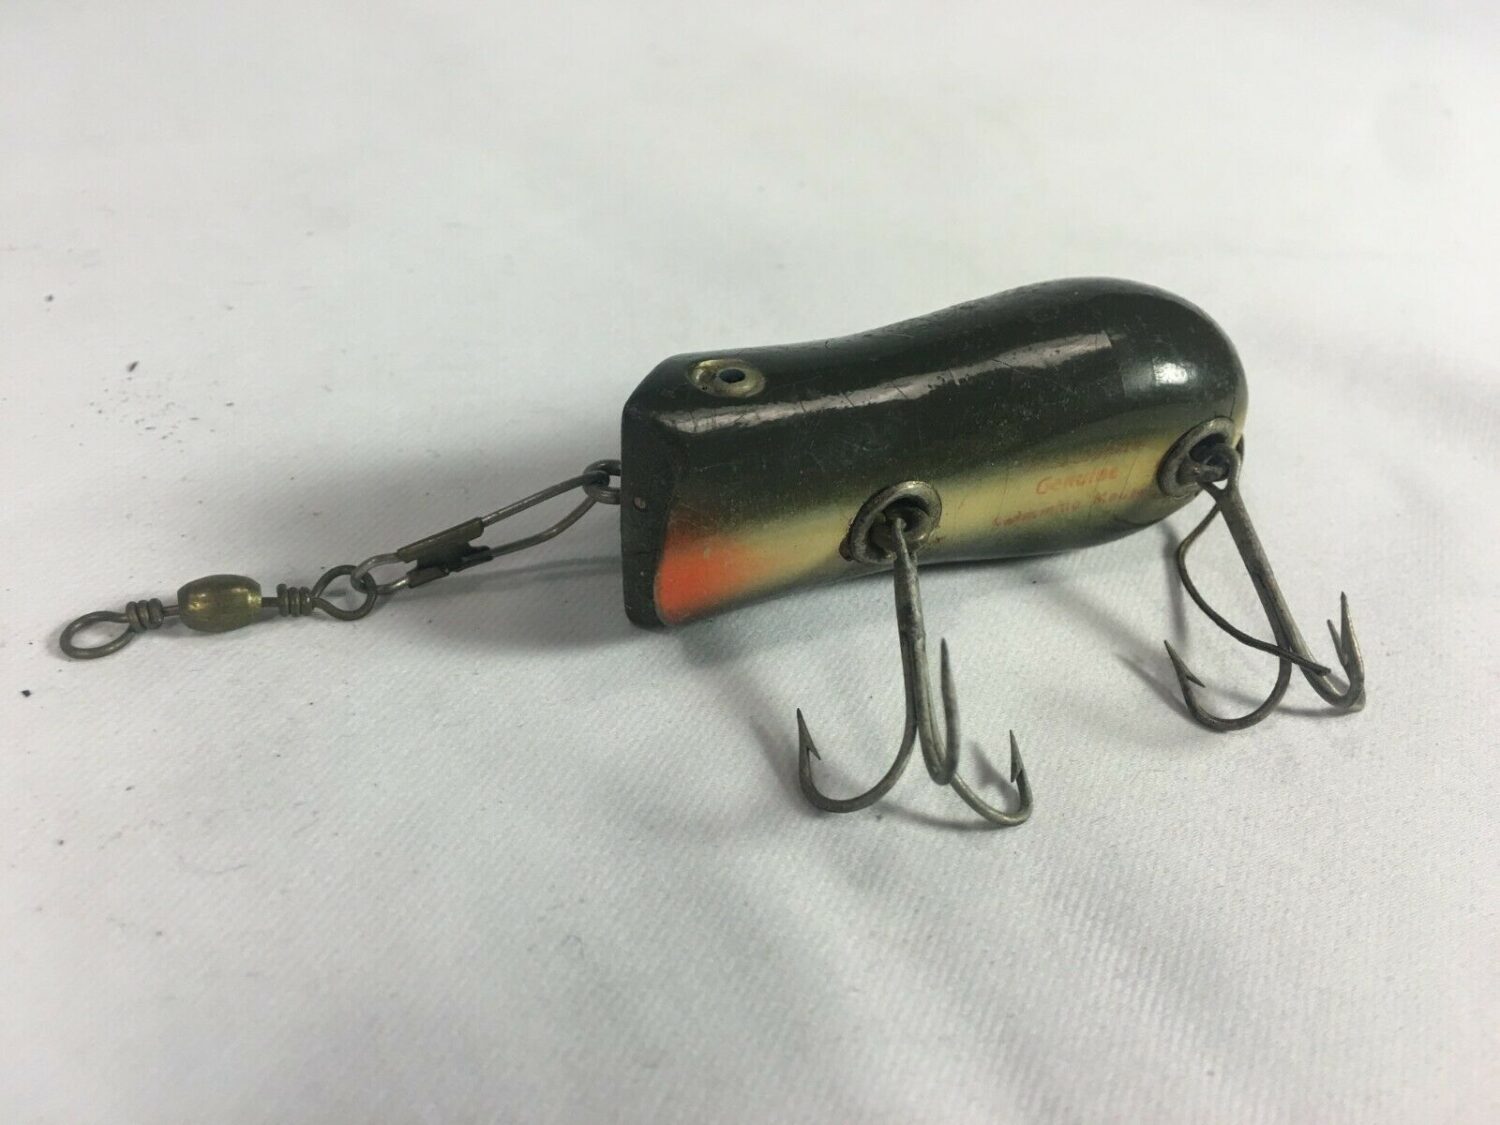 Antique fishing lures, Old fishing lures, Vintage fishing lures